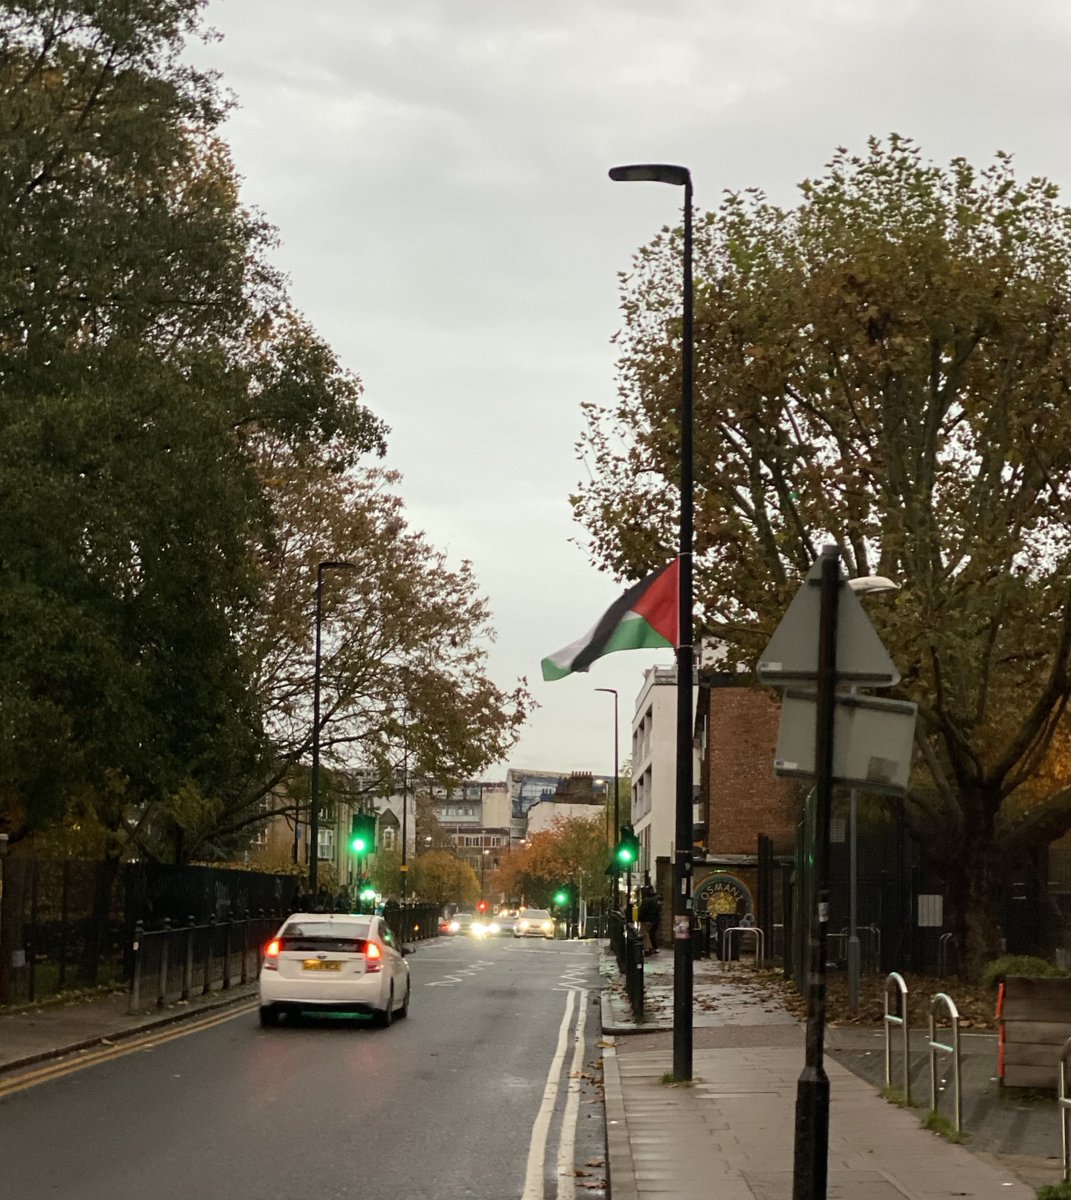 Palestinian flags are widely displayed in Tower Hamlets, London. Majority of Palestinians support October 7th terrorist attack. Thus, the display of these flags in Tower Hamlets, especially on city property, does not seem to be a mere show of support for innocent civilians, but